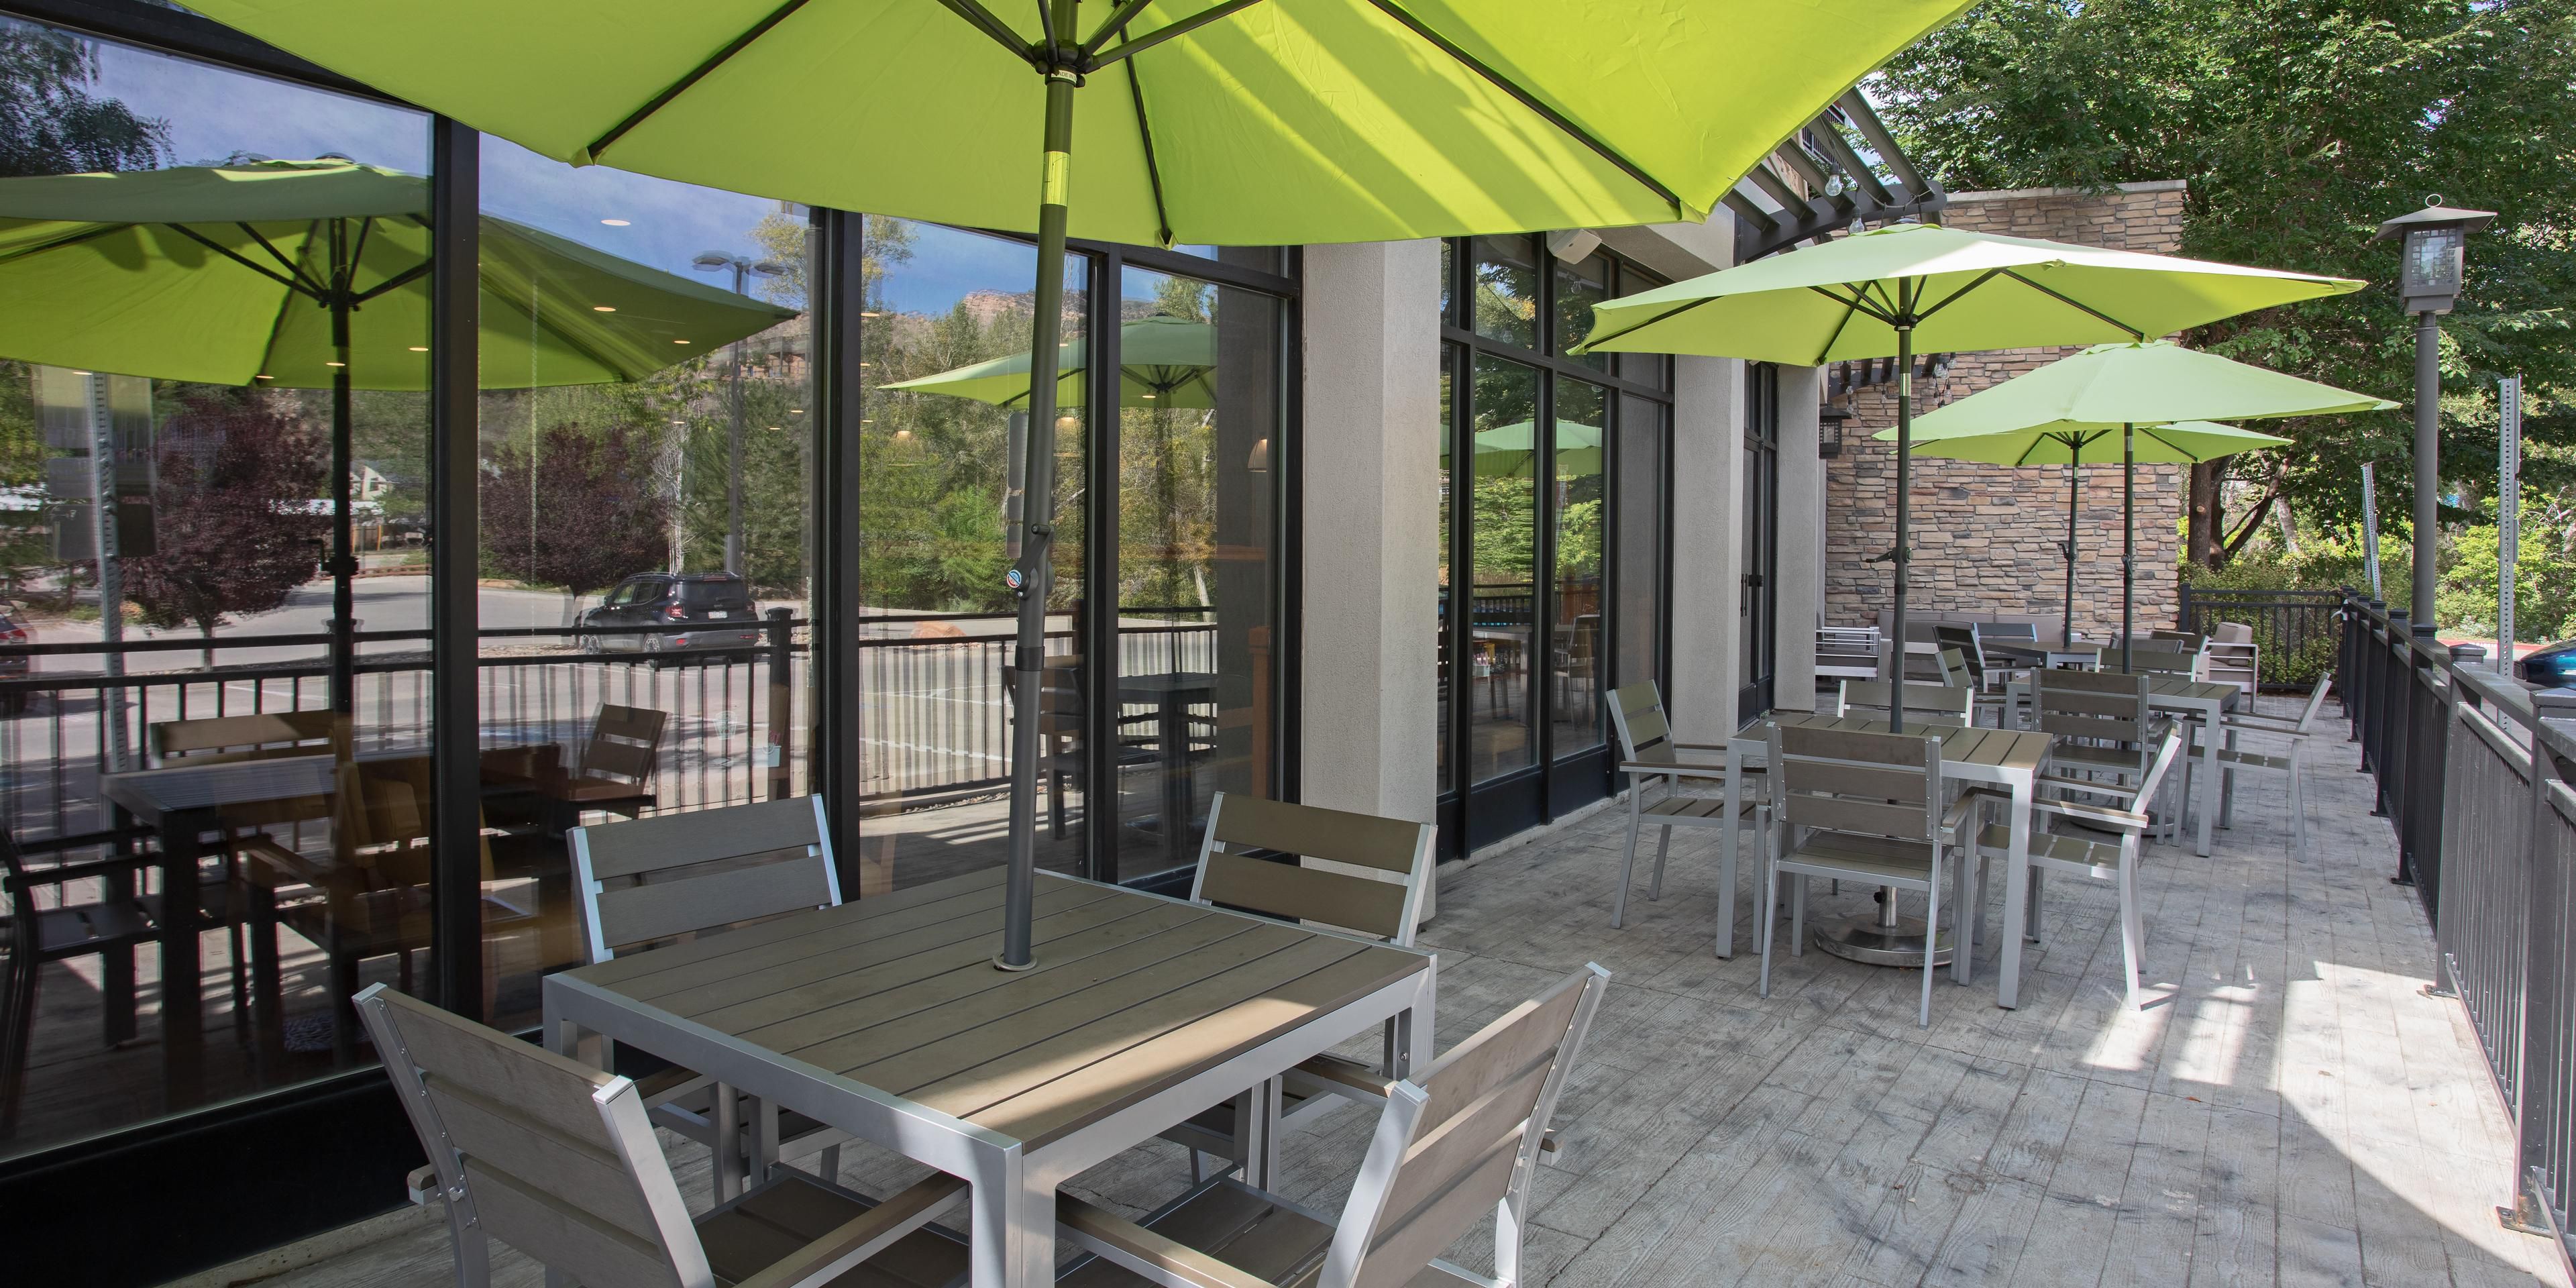 Relax on our outdoor patio with your favorite beverage and a bite.